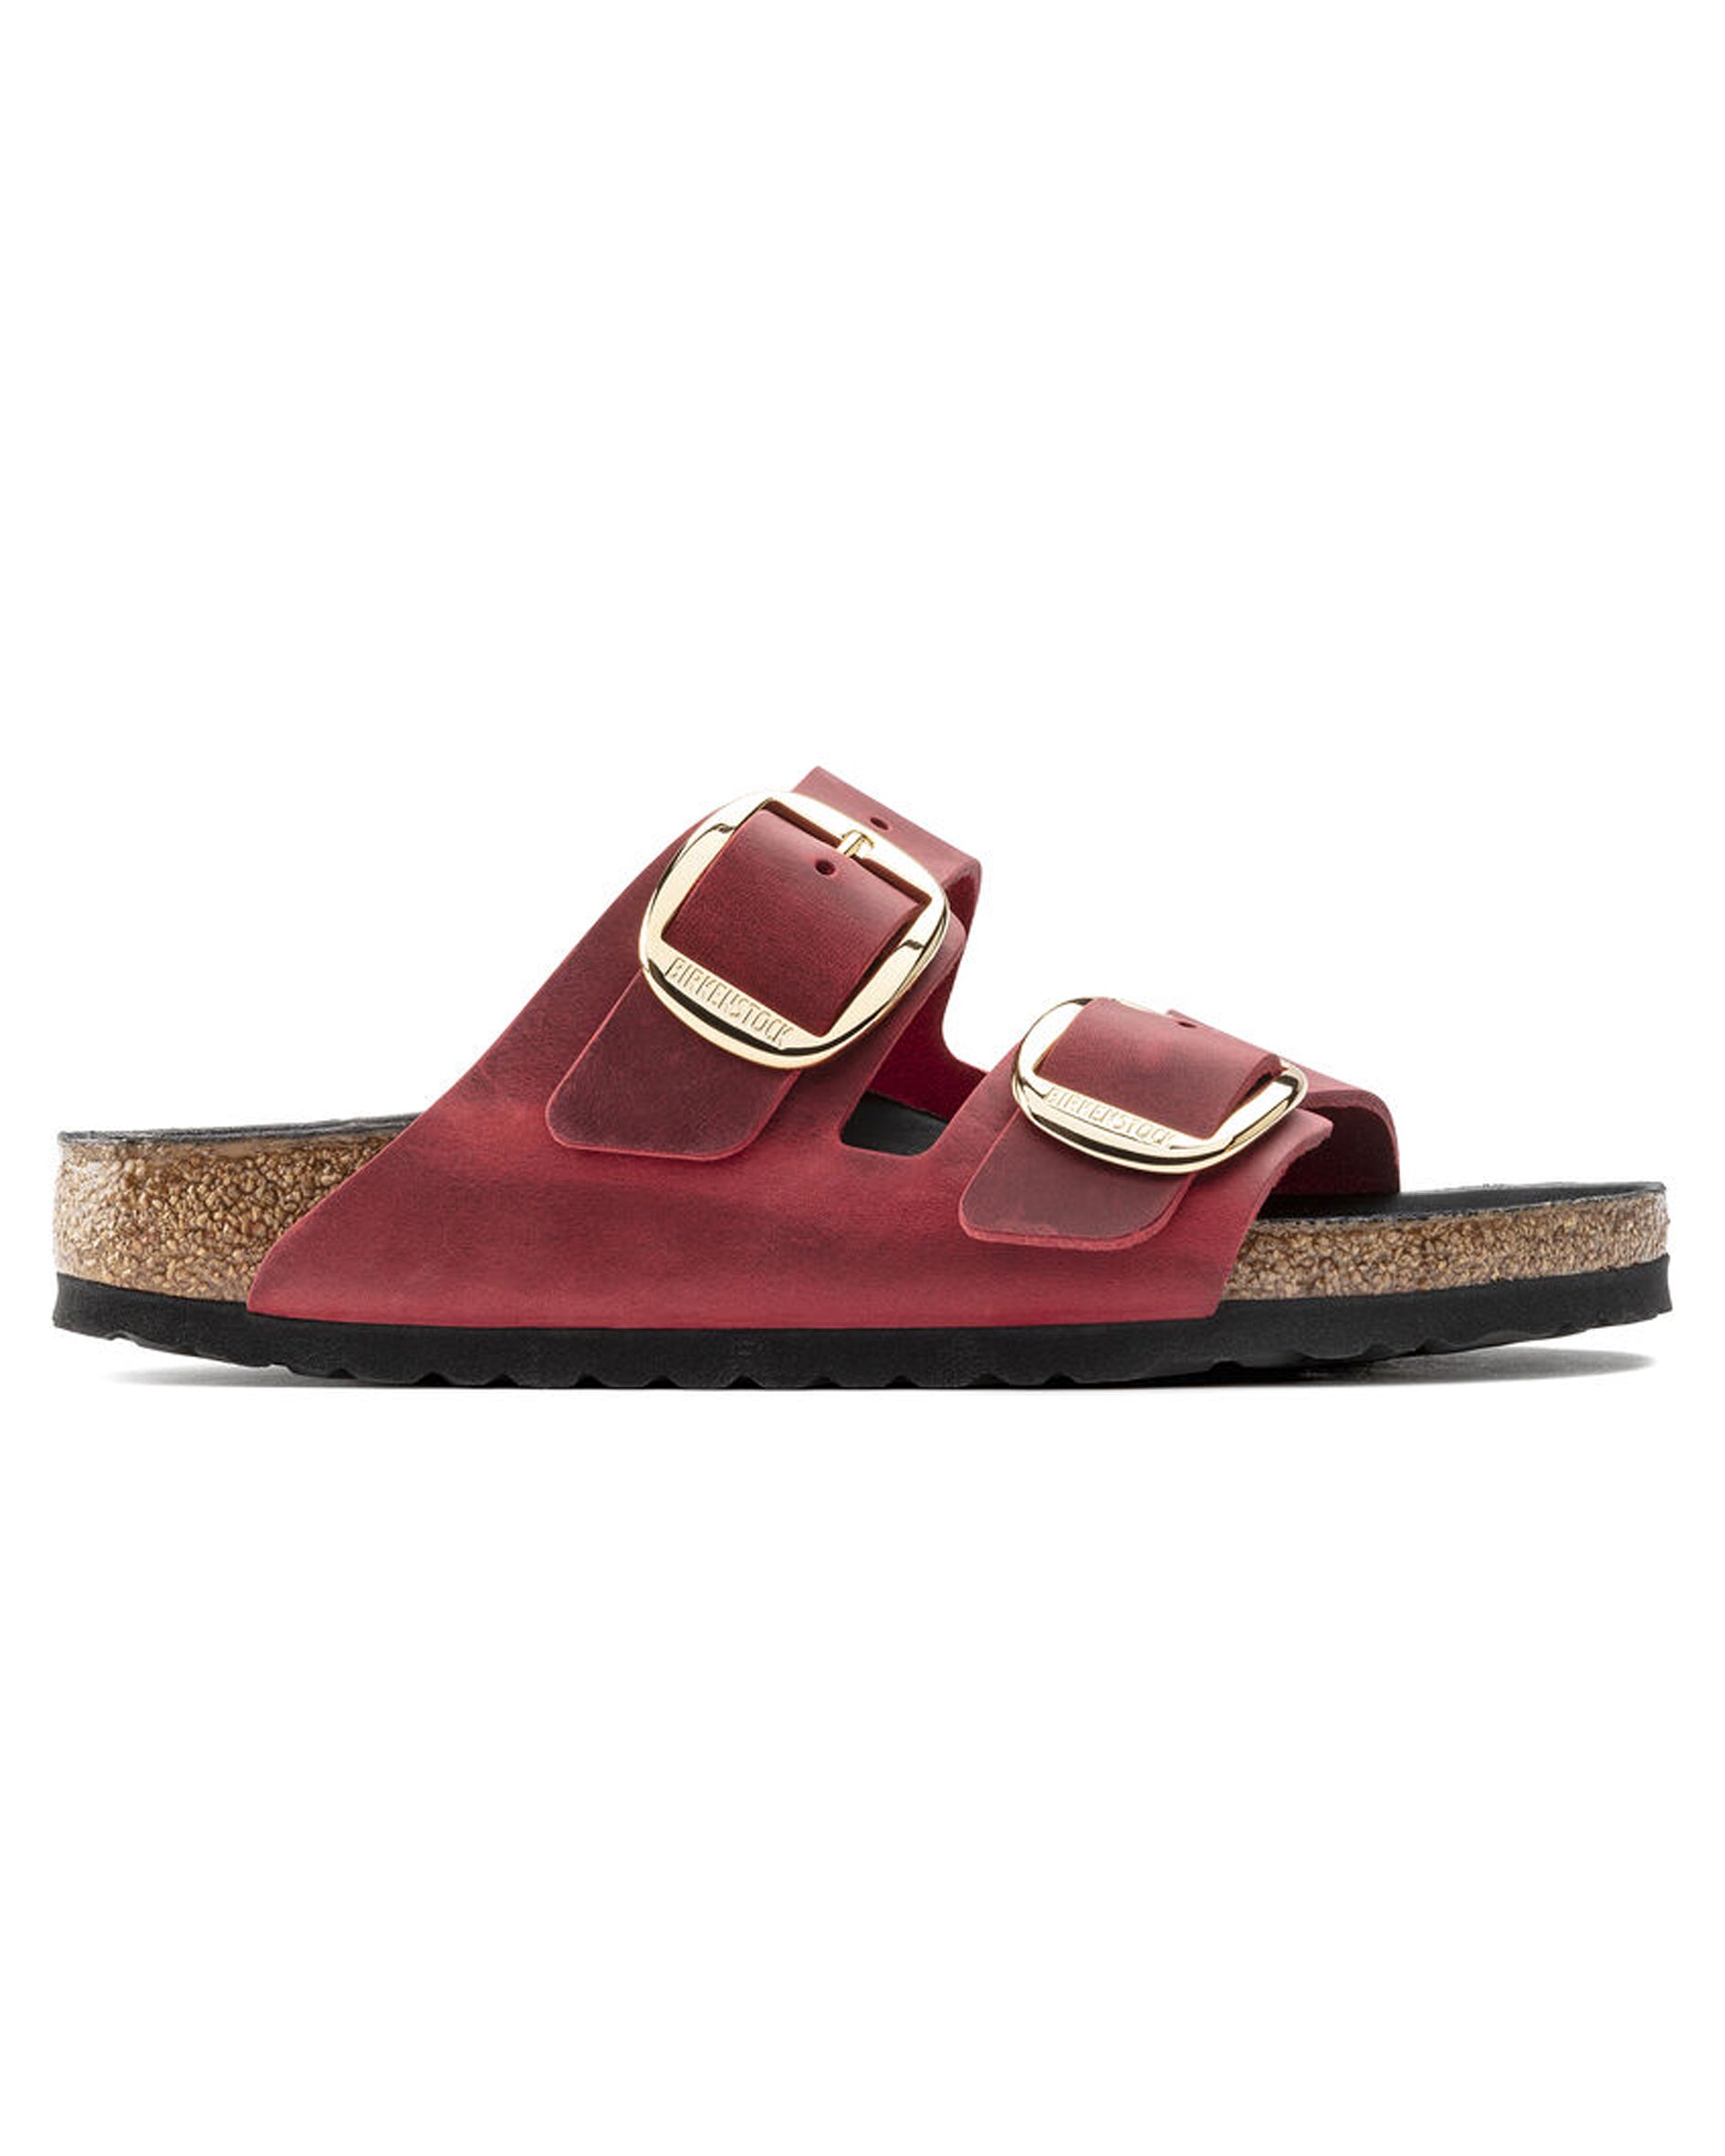 Arizona Big Buckle Fire Red Oiled Leather Sandals